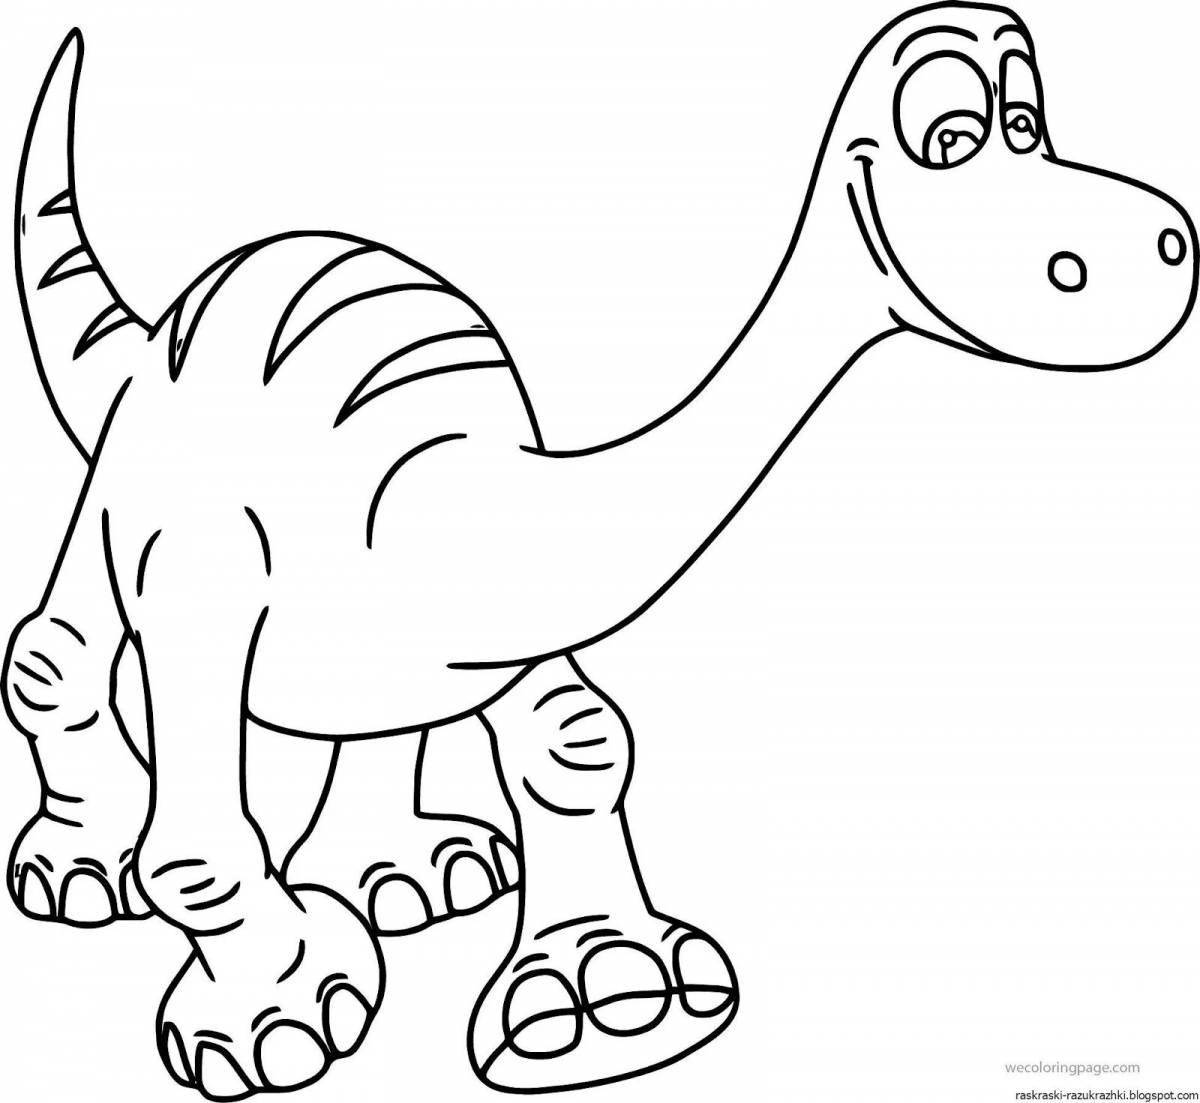 Adorable dinosaur drawings to color in